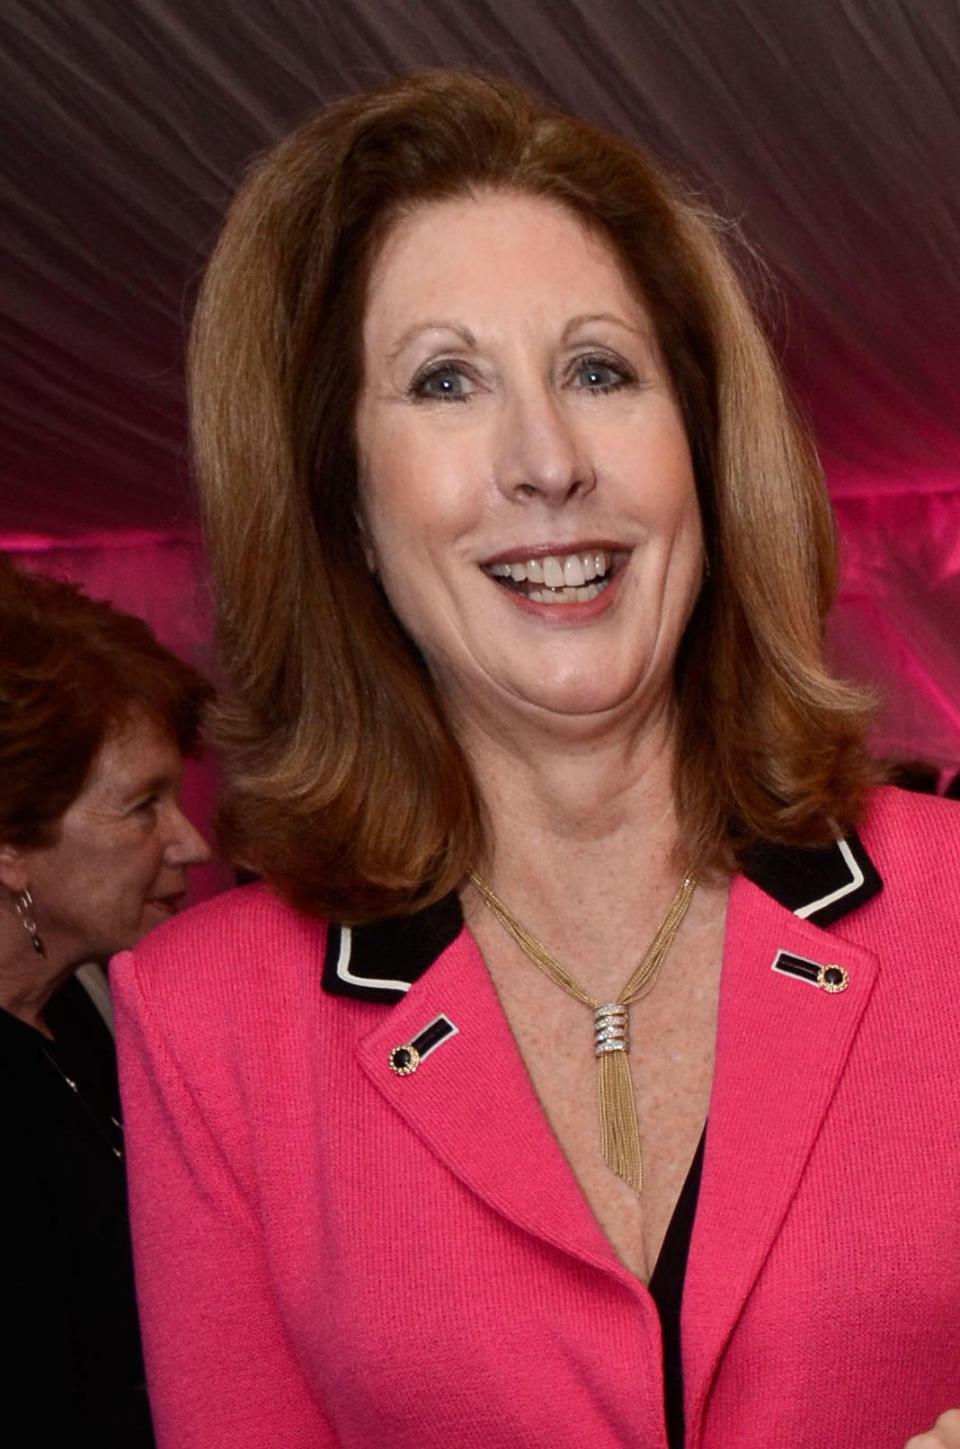 Sidney Powell attends the premiere of a breast cancer research documentary in Asheville in 2013.